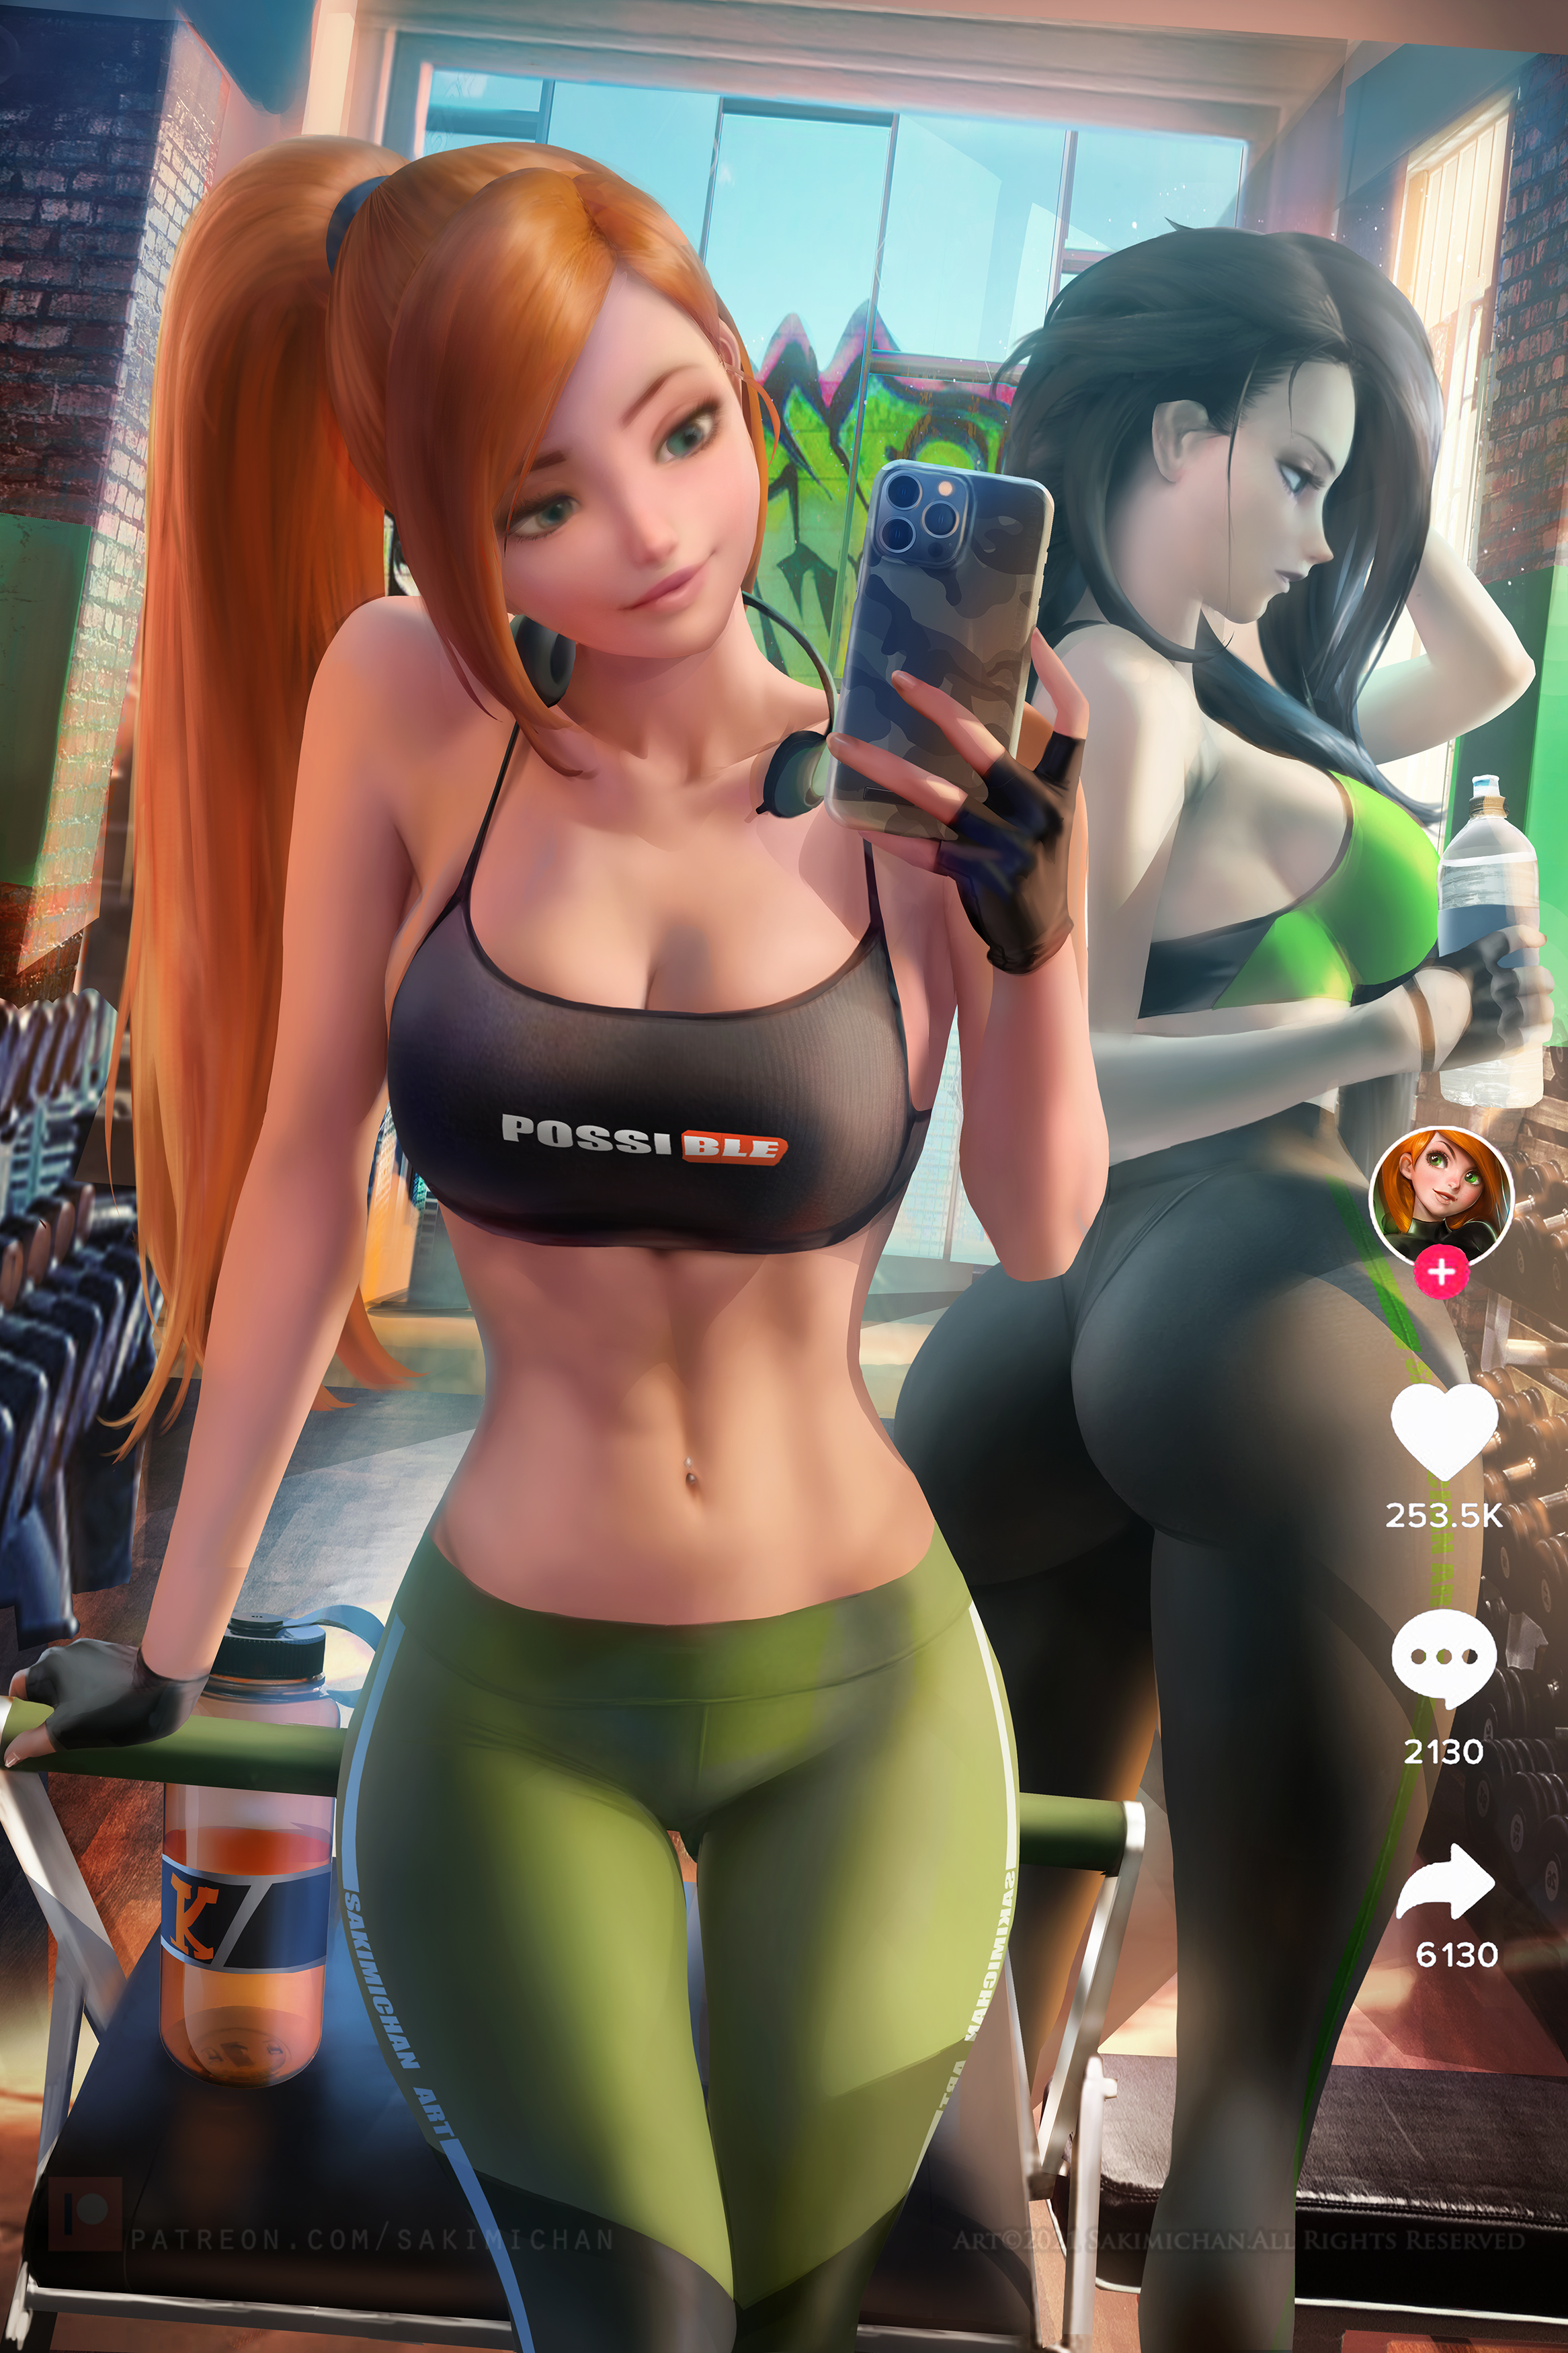 General 2333x3500 Kimberly Ann Possible Shego Kim Possible TV series fictional character 2D artwork drawing fan art Sakimichan gyms selfies reflection cartoon yoga pants water bottle cleavage ponytail ass big boobs sideboob phone cellphone digital art portrait display watermarked